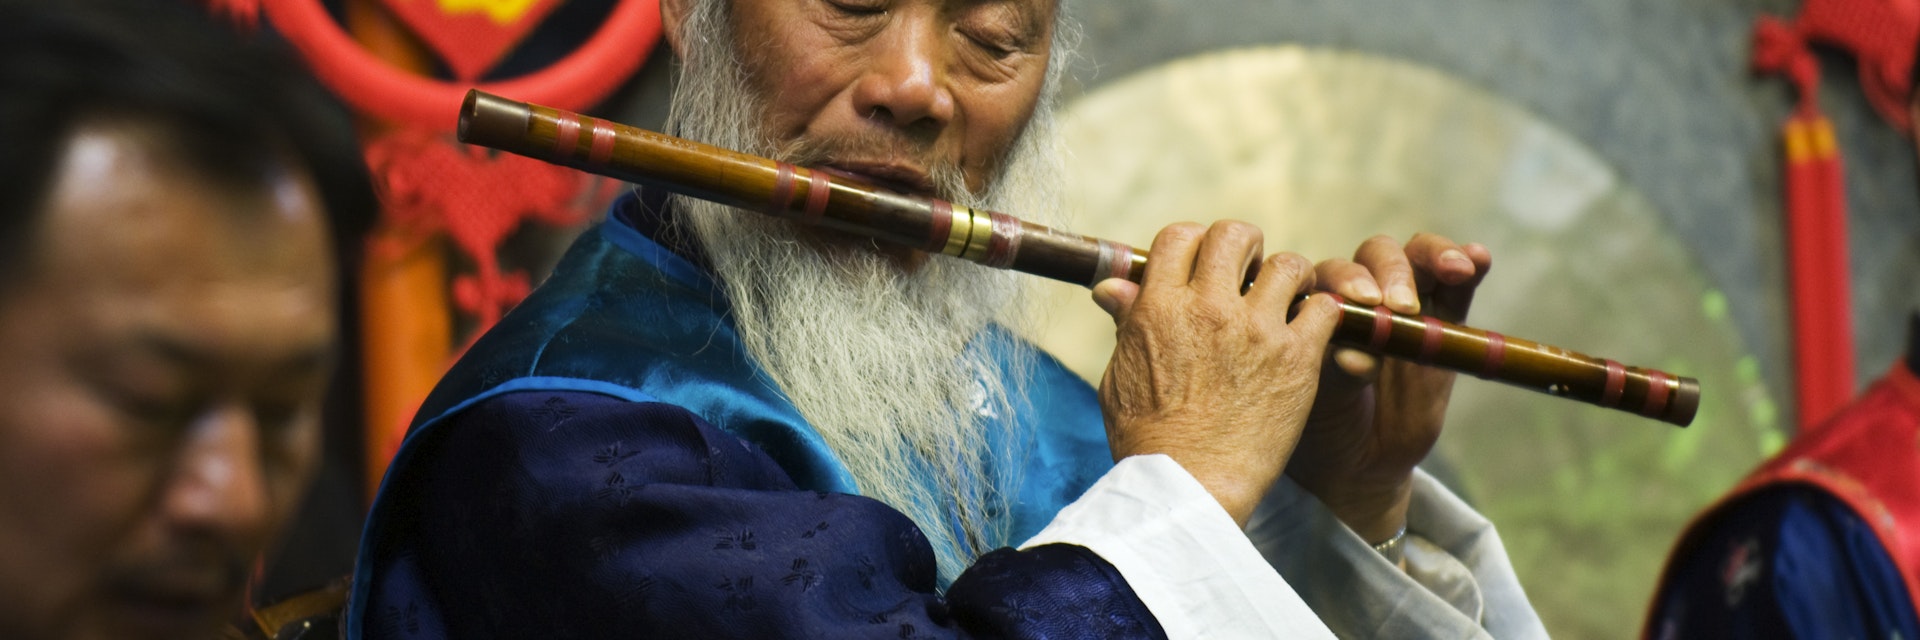 China, Yunnan province, Lijiang town. Naxi orchestra musician playng the flute at the Unesco World Heritage Site